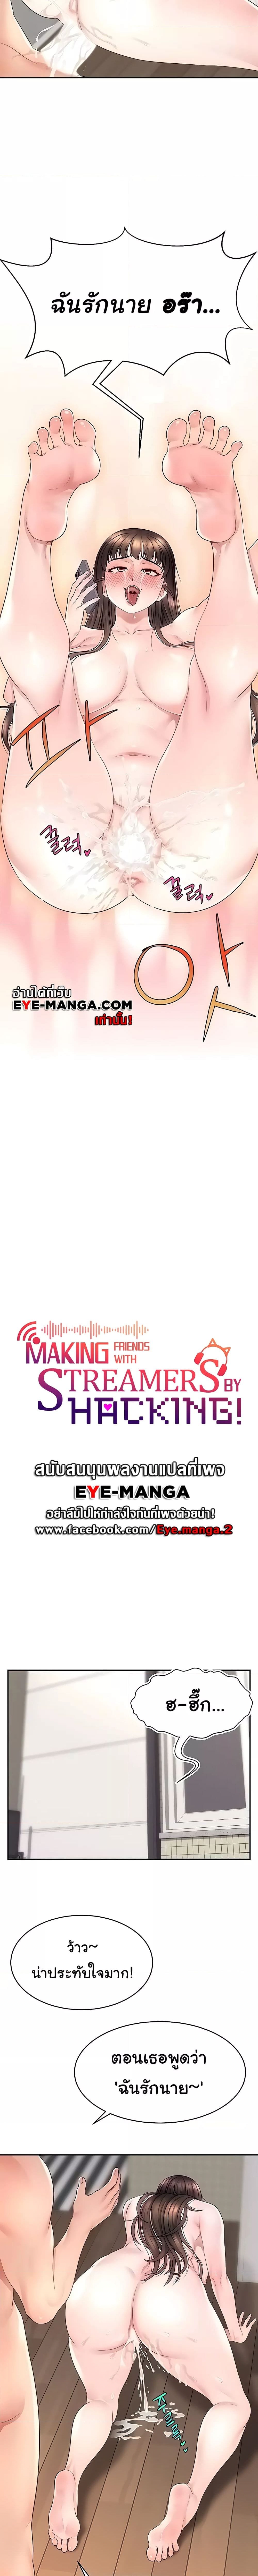 Making Friends With Streamers by Hacking! ตอนที่ 12 ภาพ 4